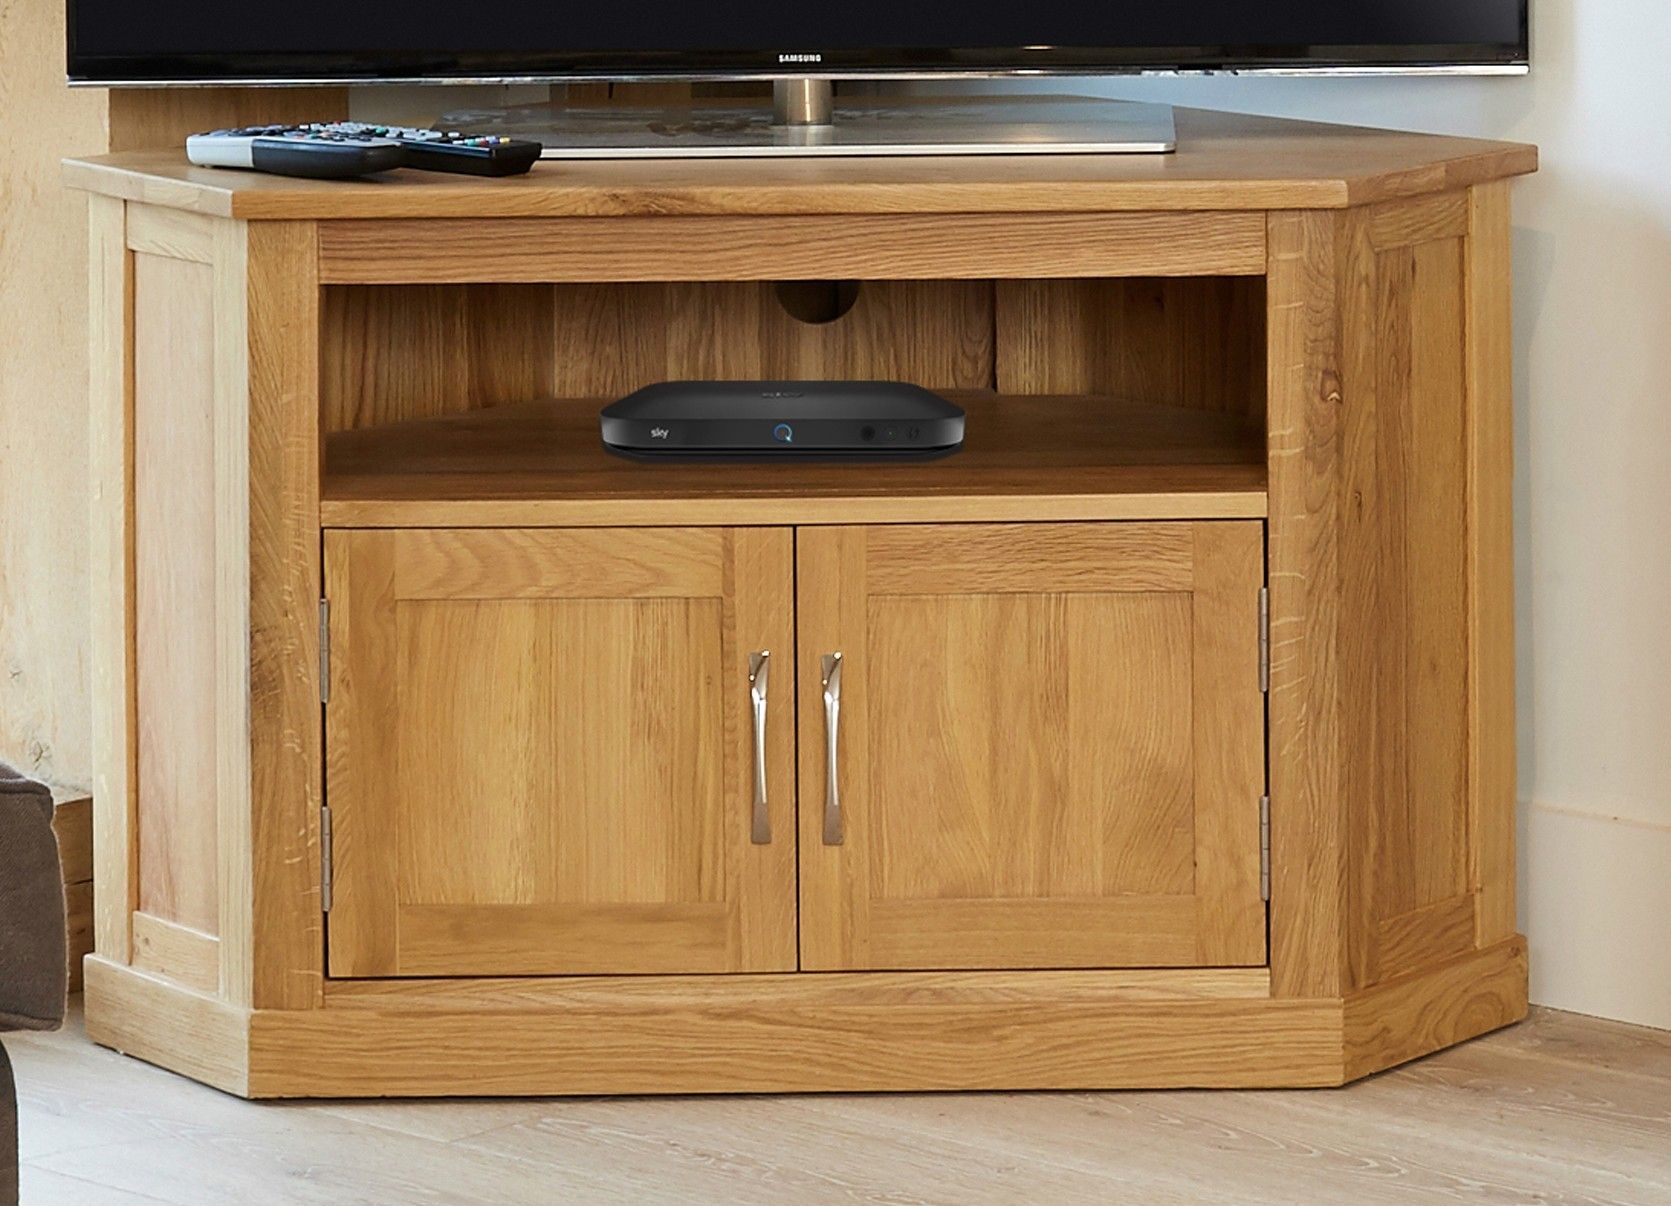 Oak Corner Tv Cabinet Furniture • Patio Ideas With Regard To Large Oak Tv Cabinets (View 6 of 15)